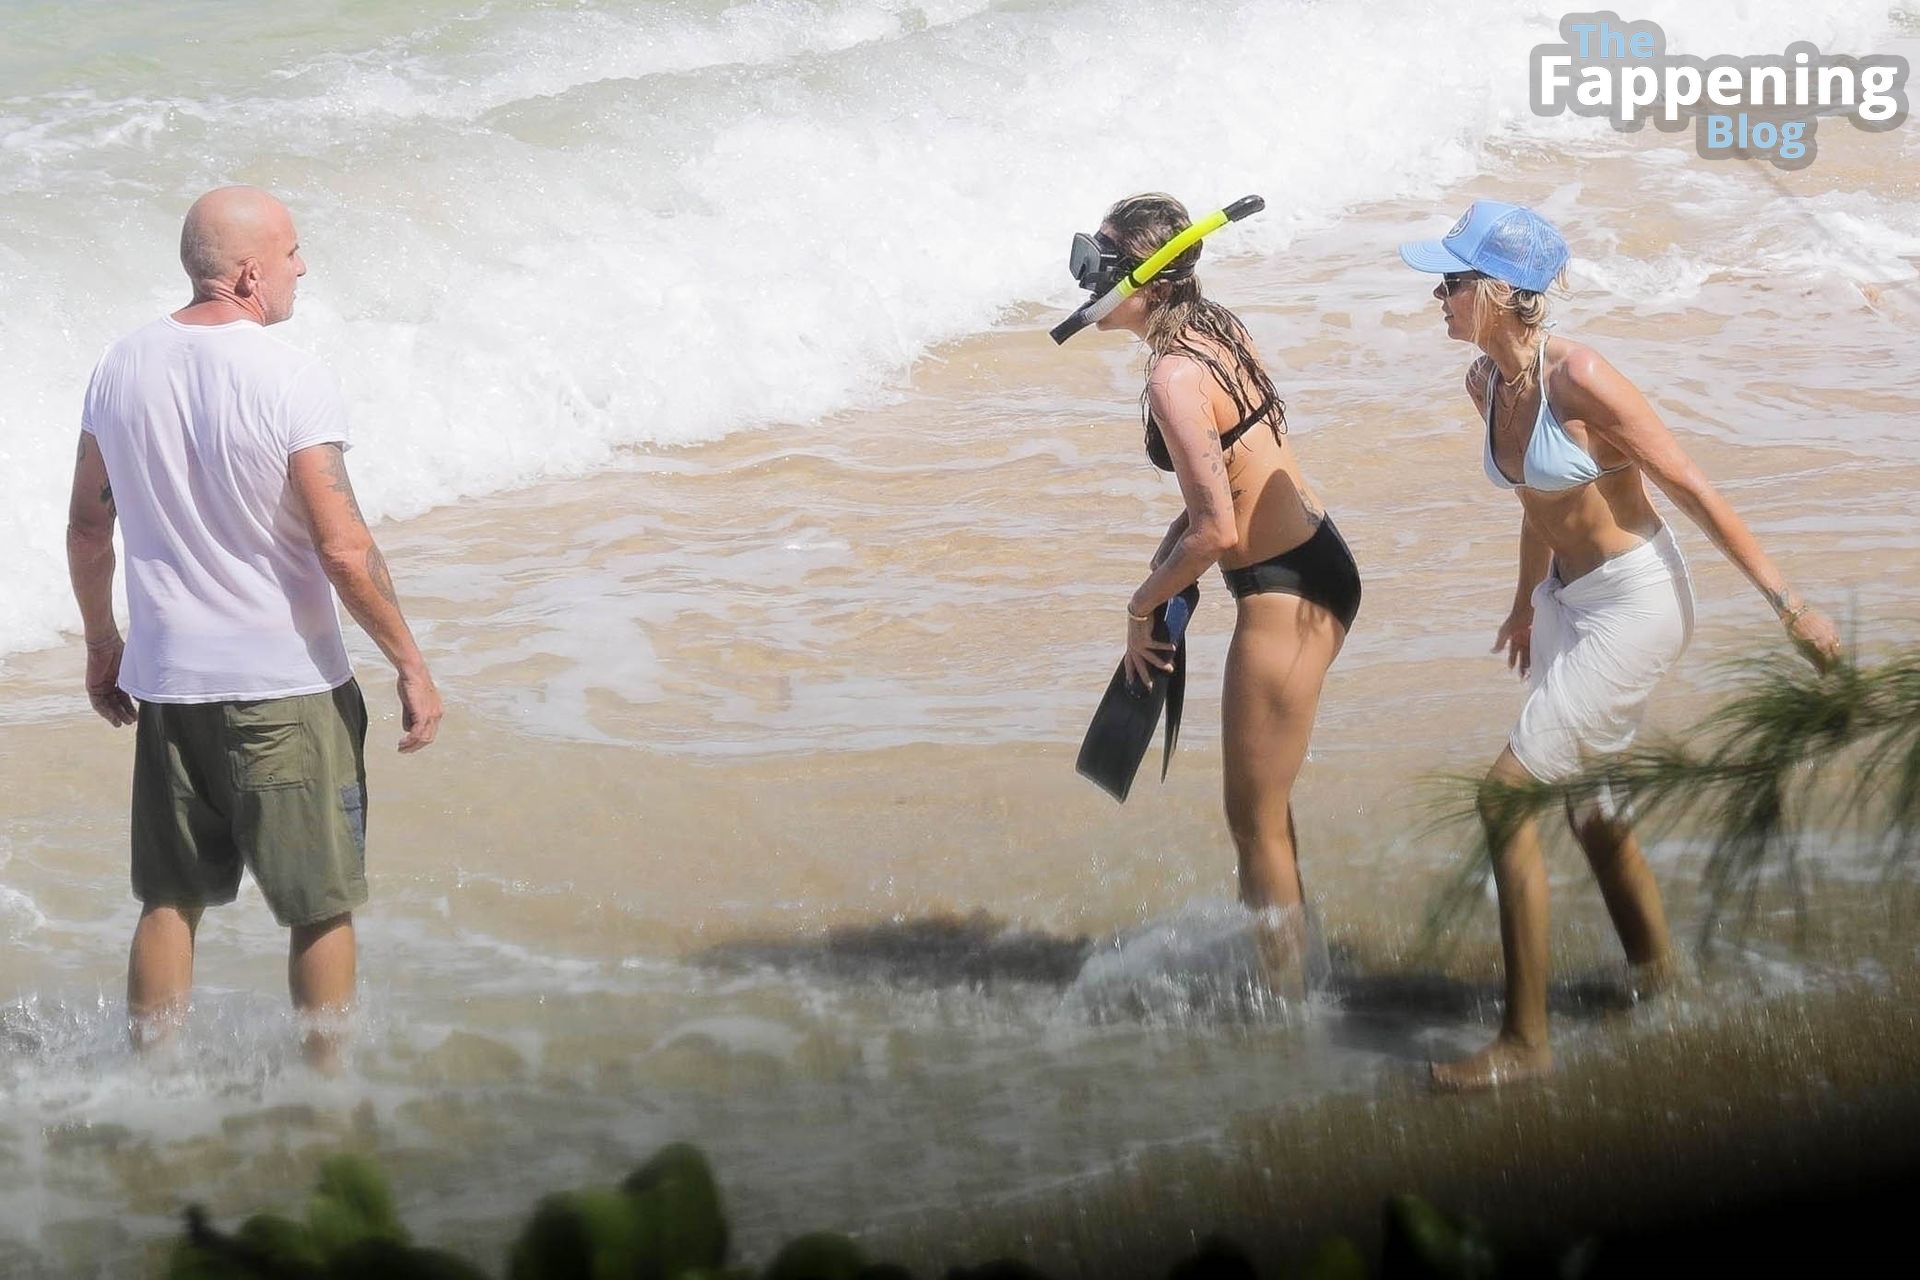 Miley Cyrus Enjoys Some Snorkeling During a Beach Day with Her Mother and Stepfather in Hawaii (66 Photos)